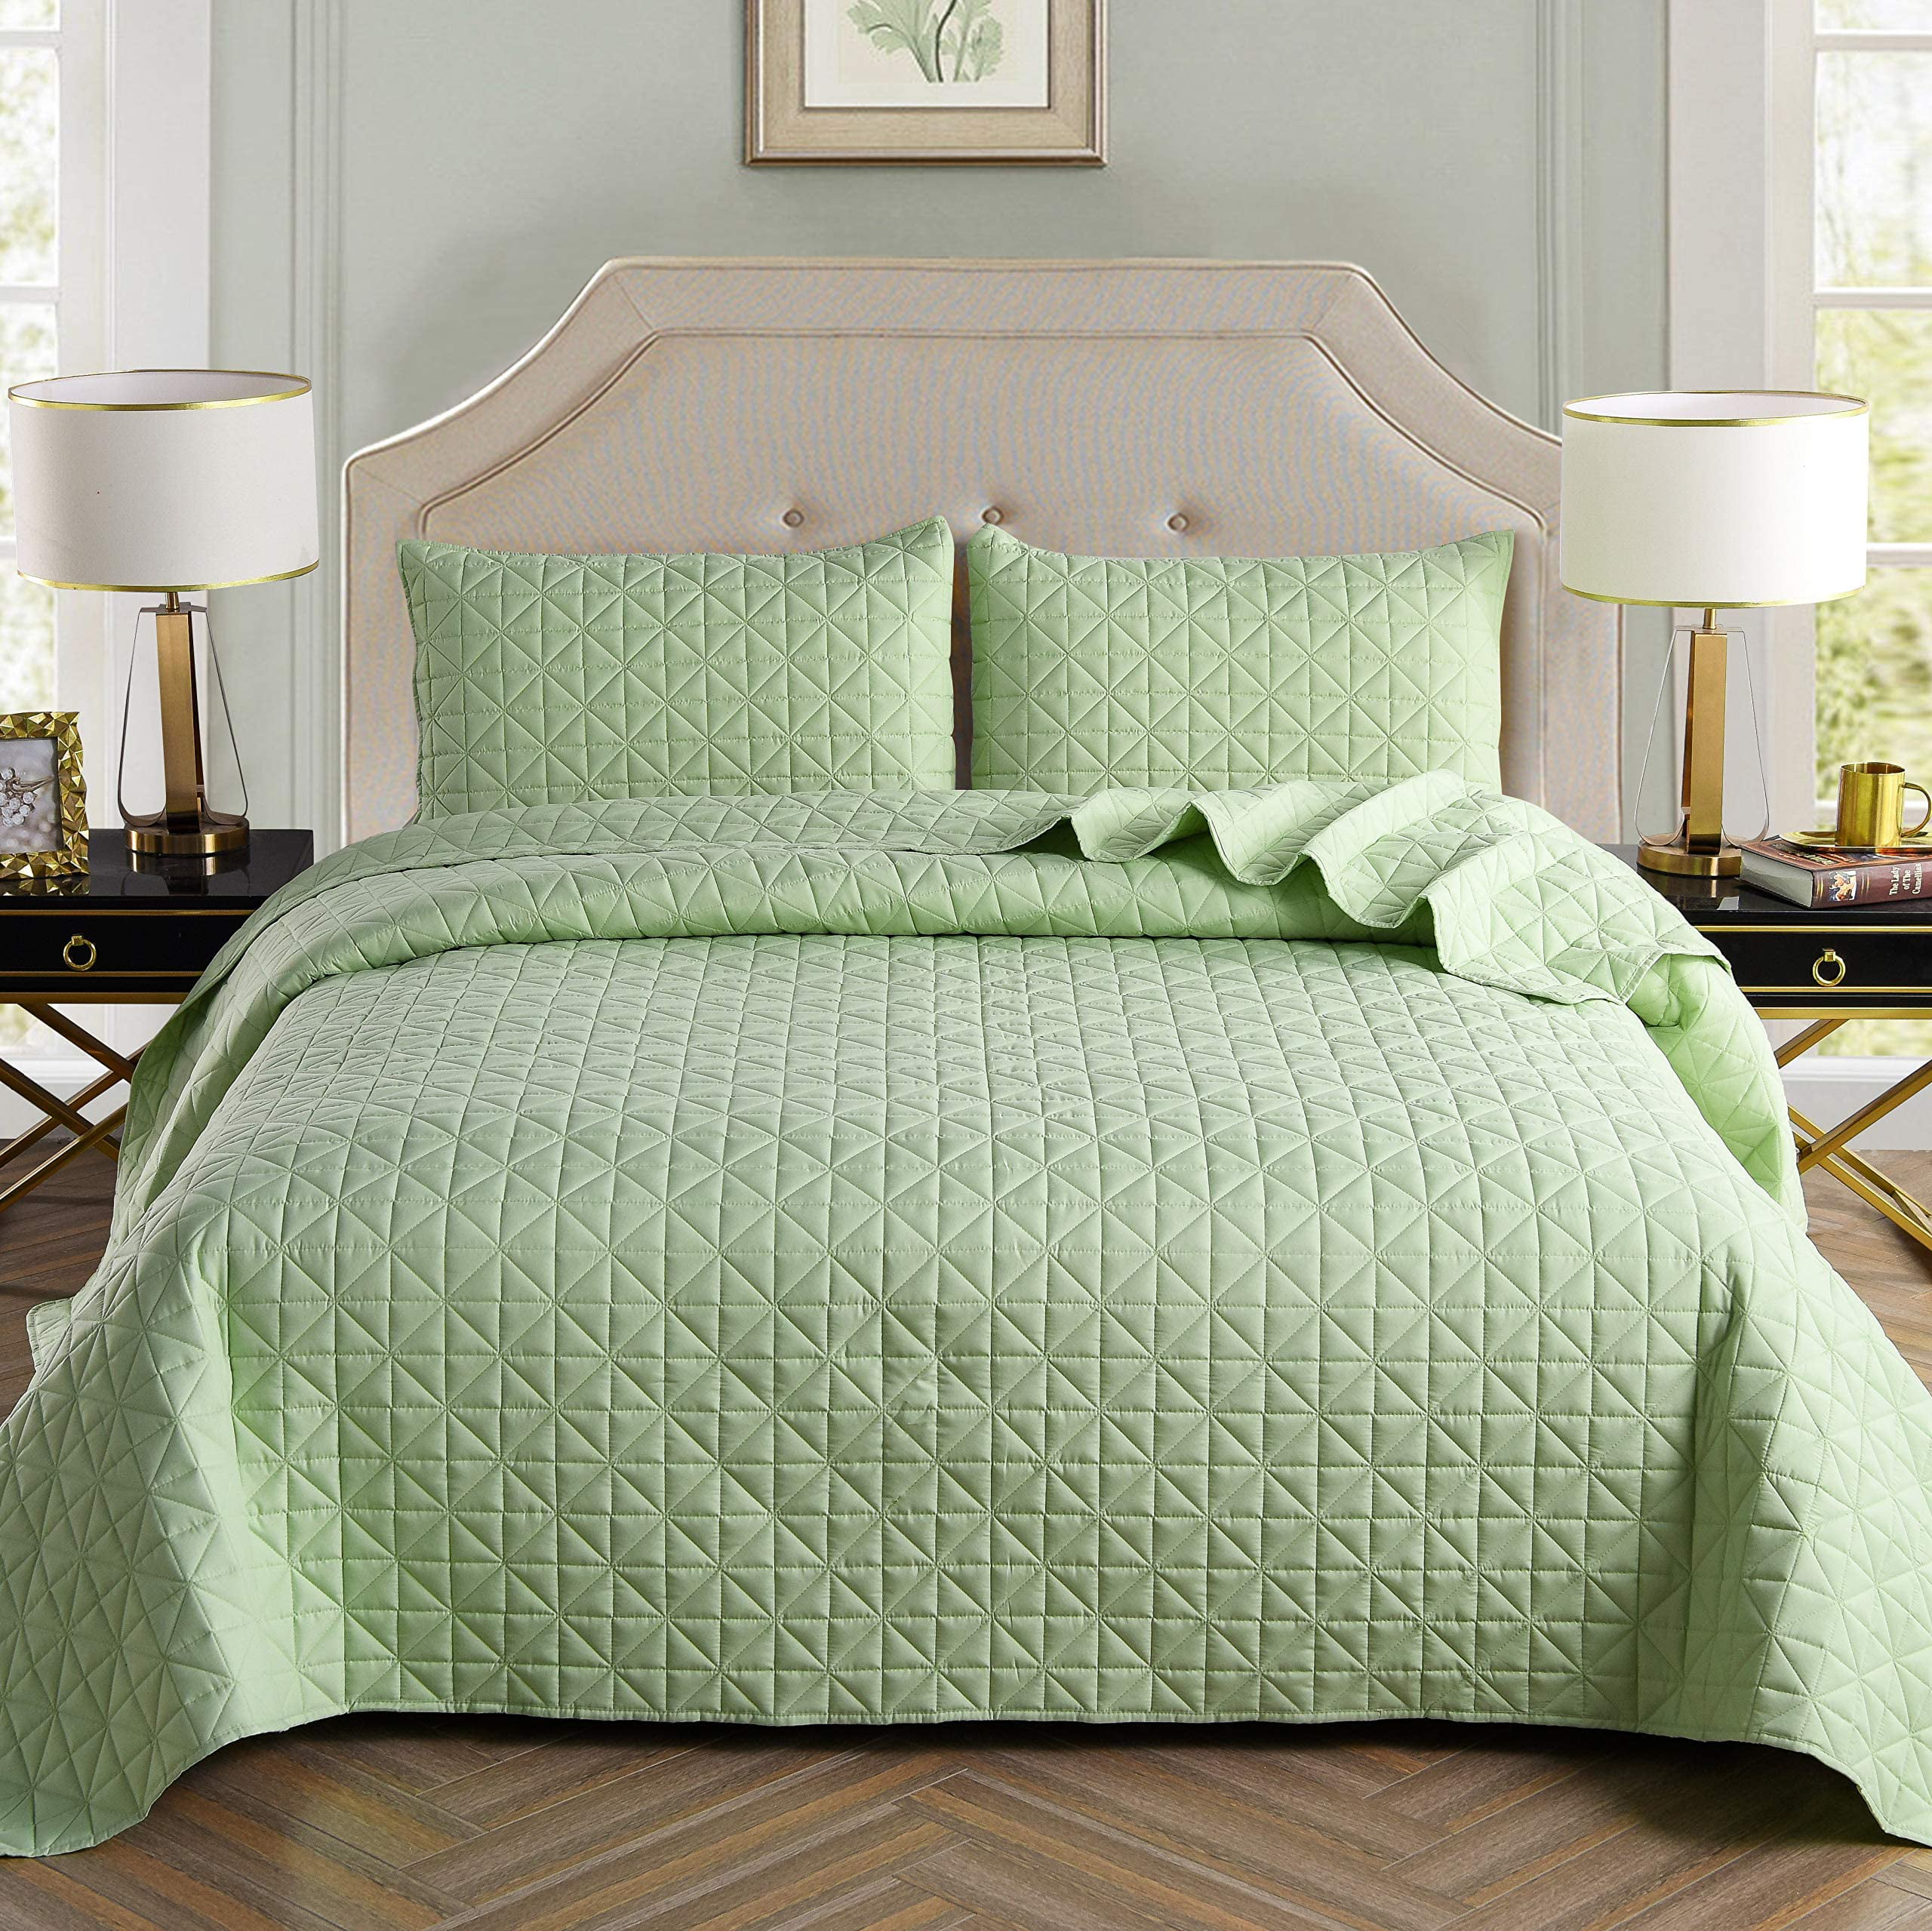 King Size Quilt Set With Pillow Shams, Seafoam Green Duvet Cover King Size